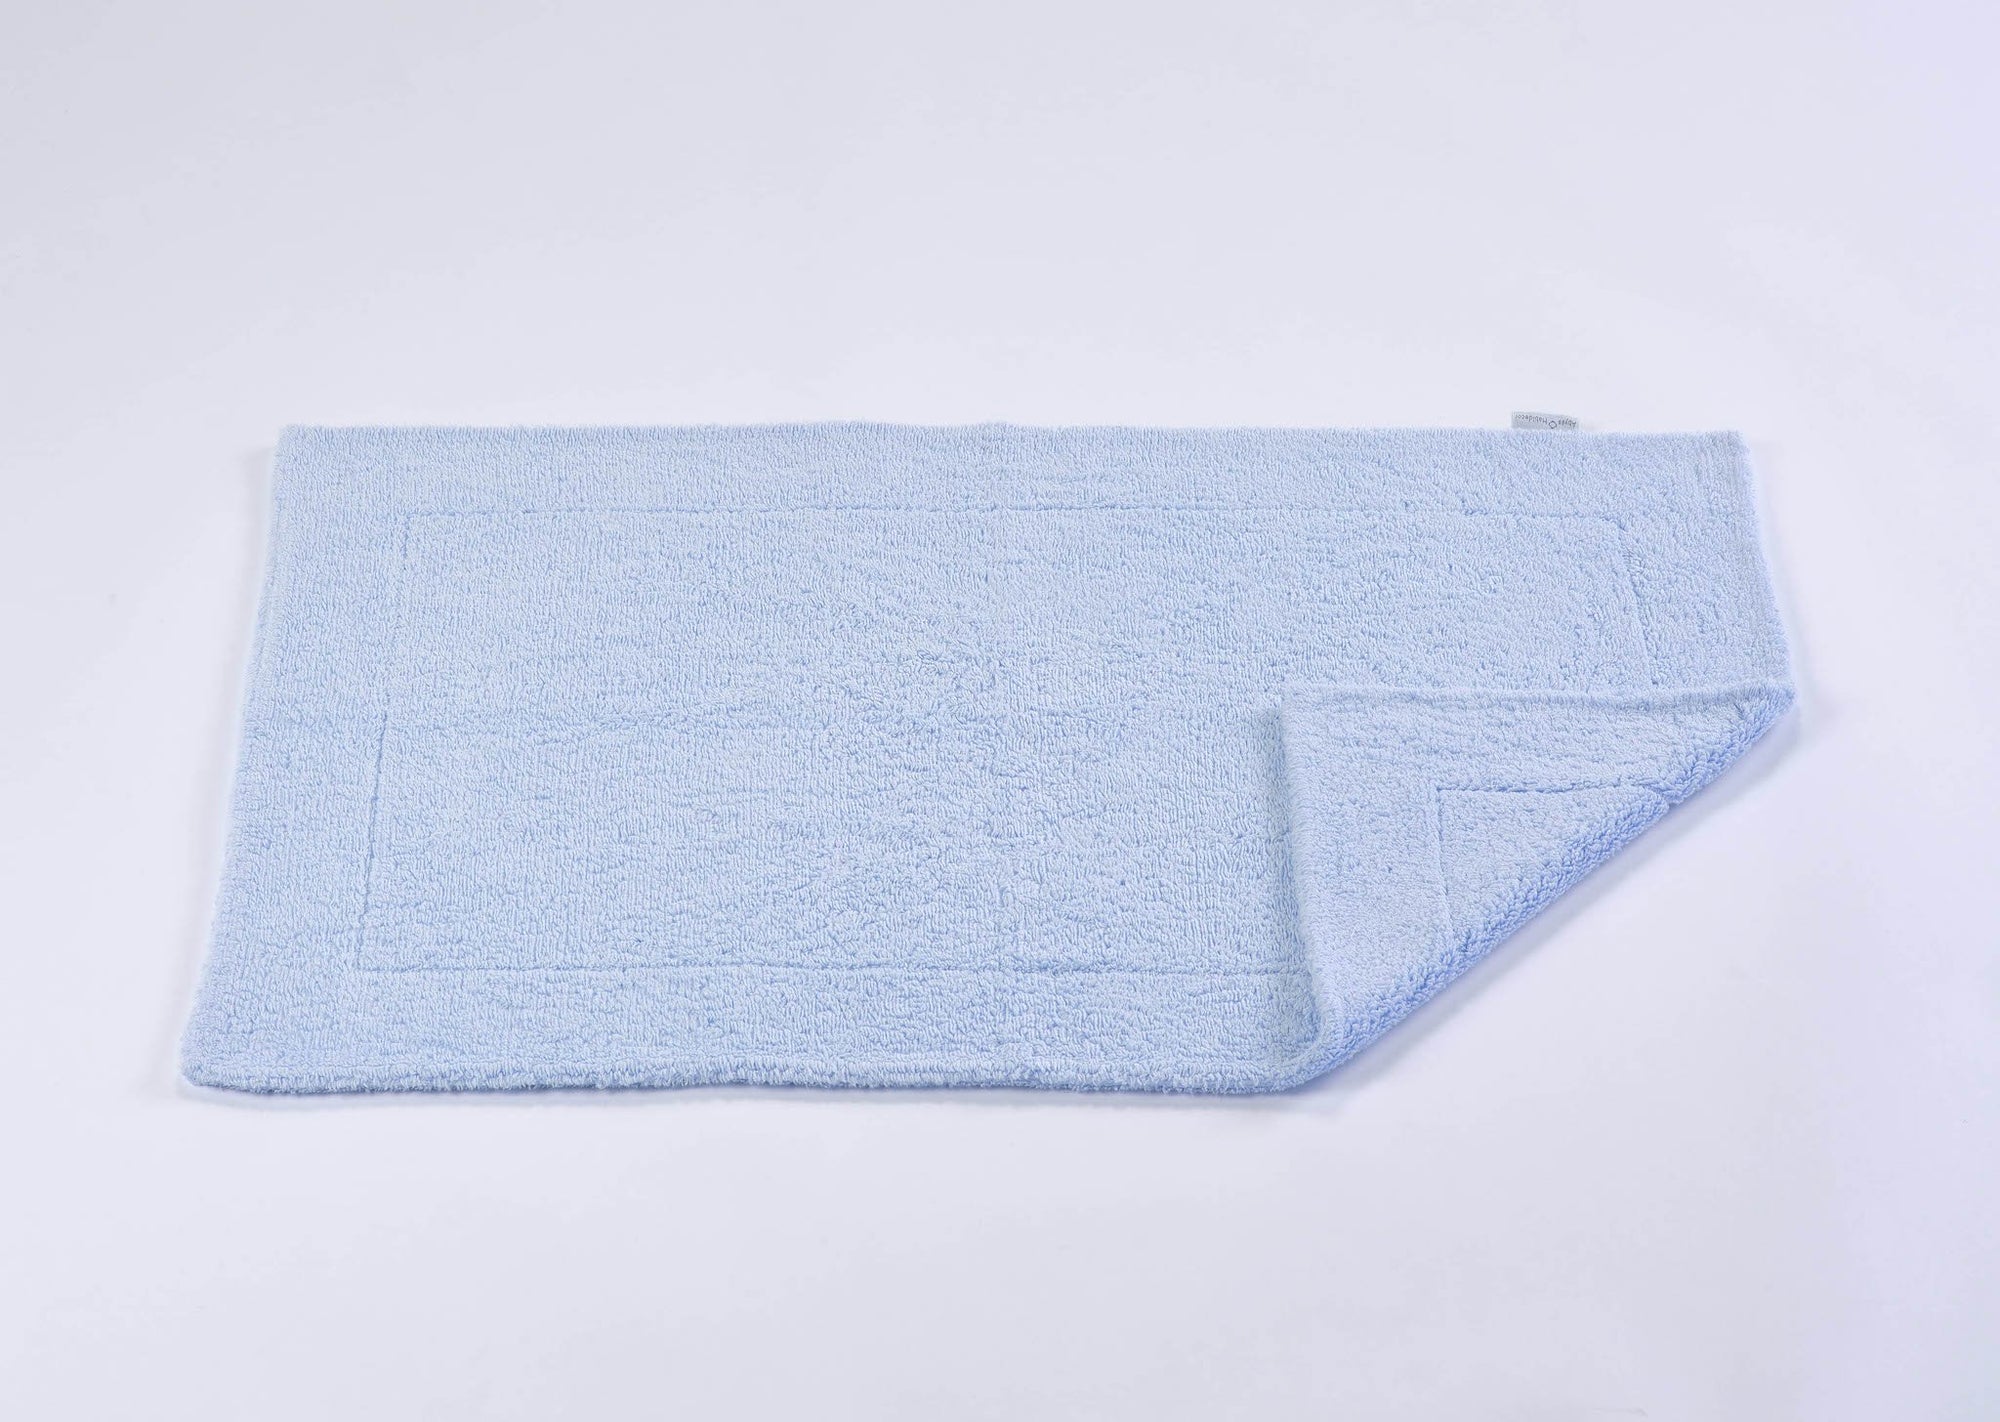 Fig Linens - Double Bath Mat 20x31 by Abyss and Habidecor -  Powder Blue